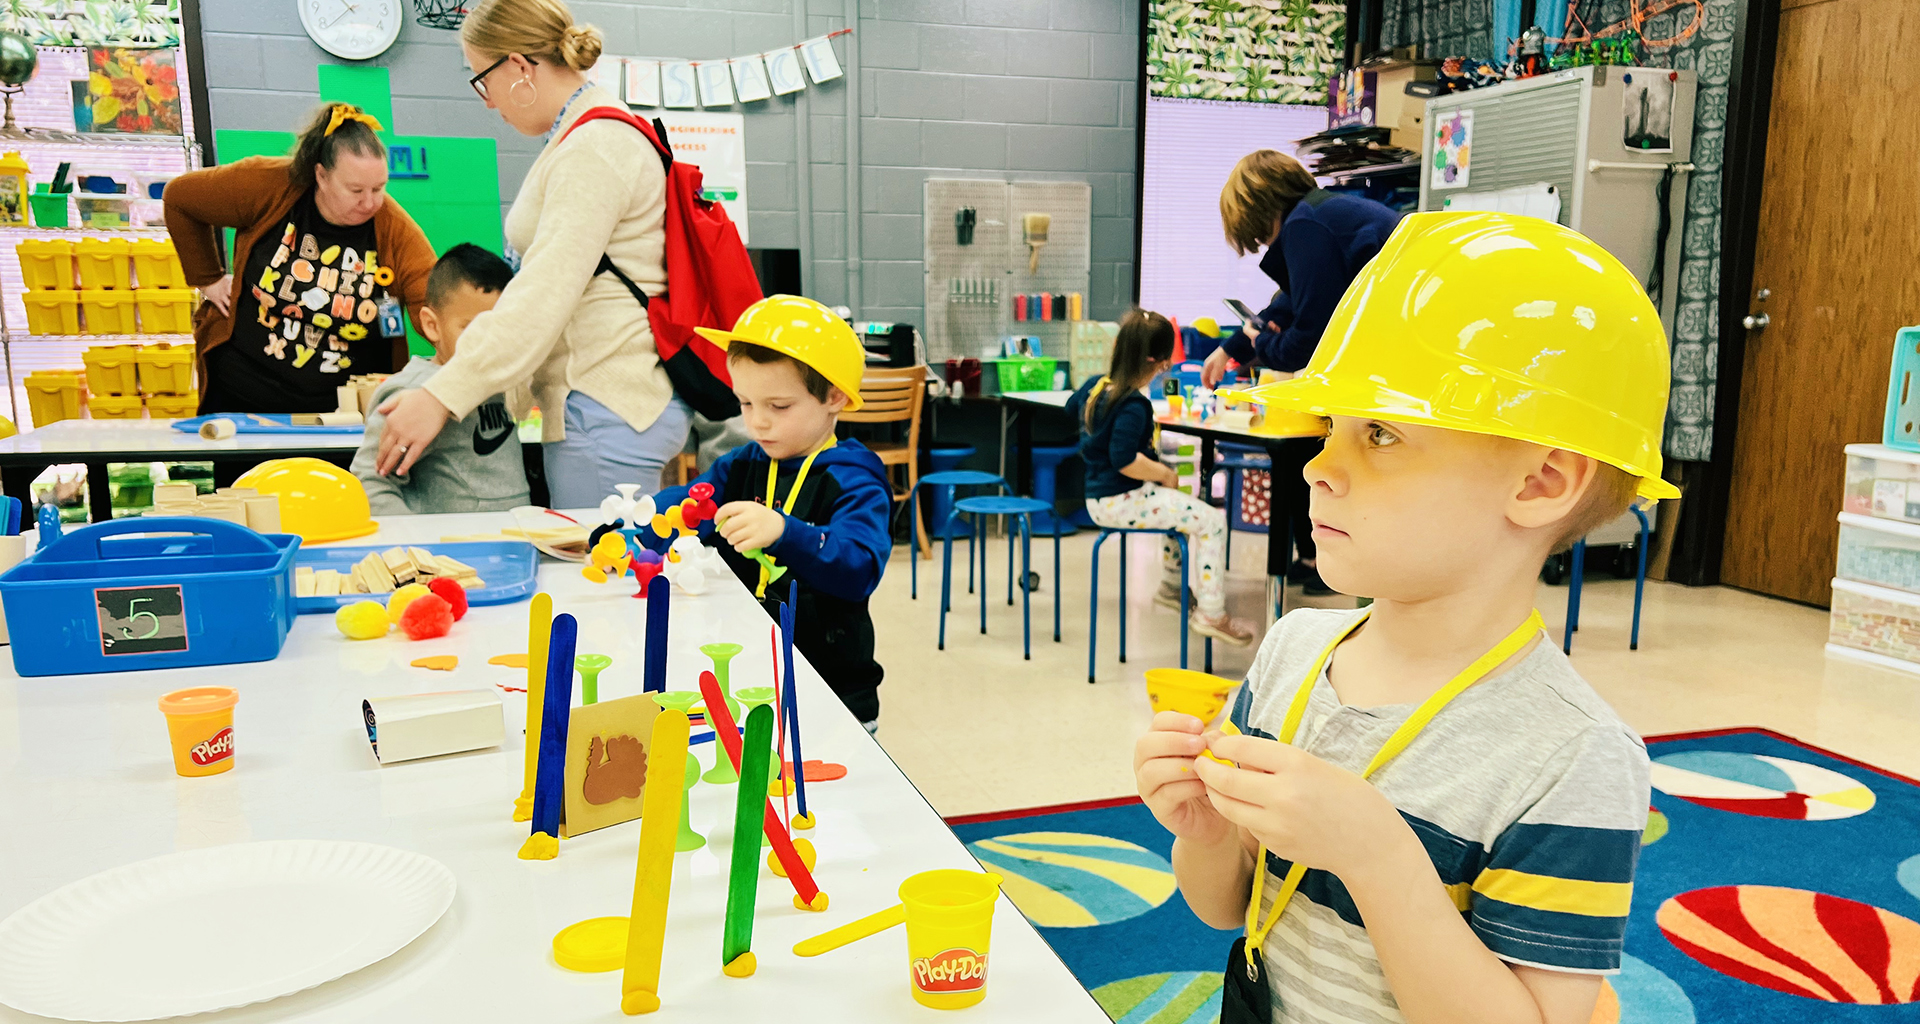 Young students building with blocks while wearing hardhats.